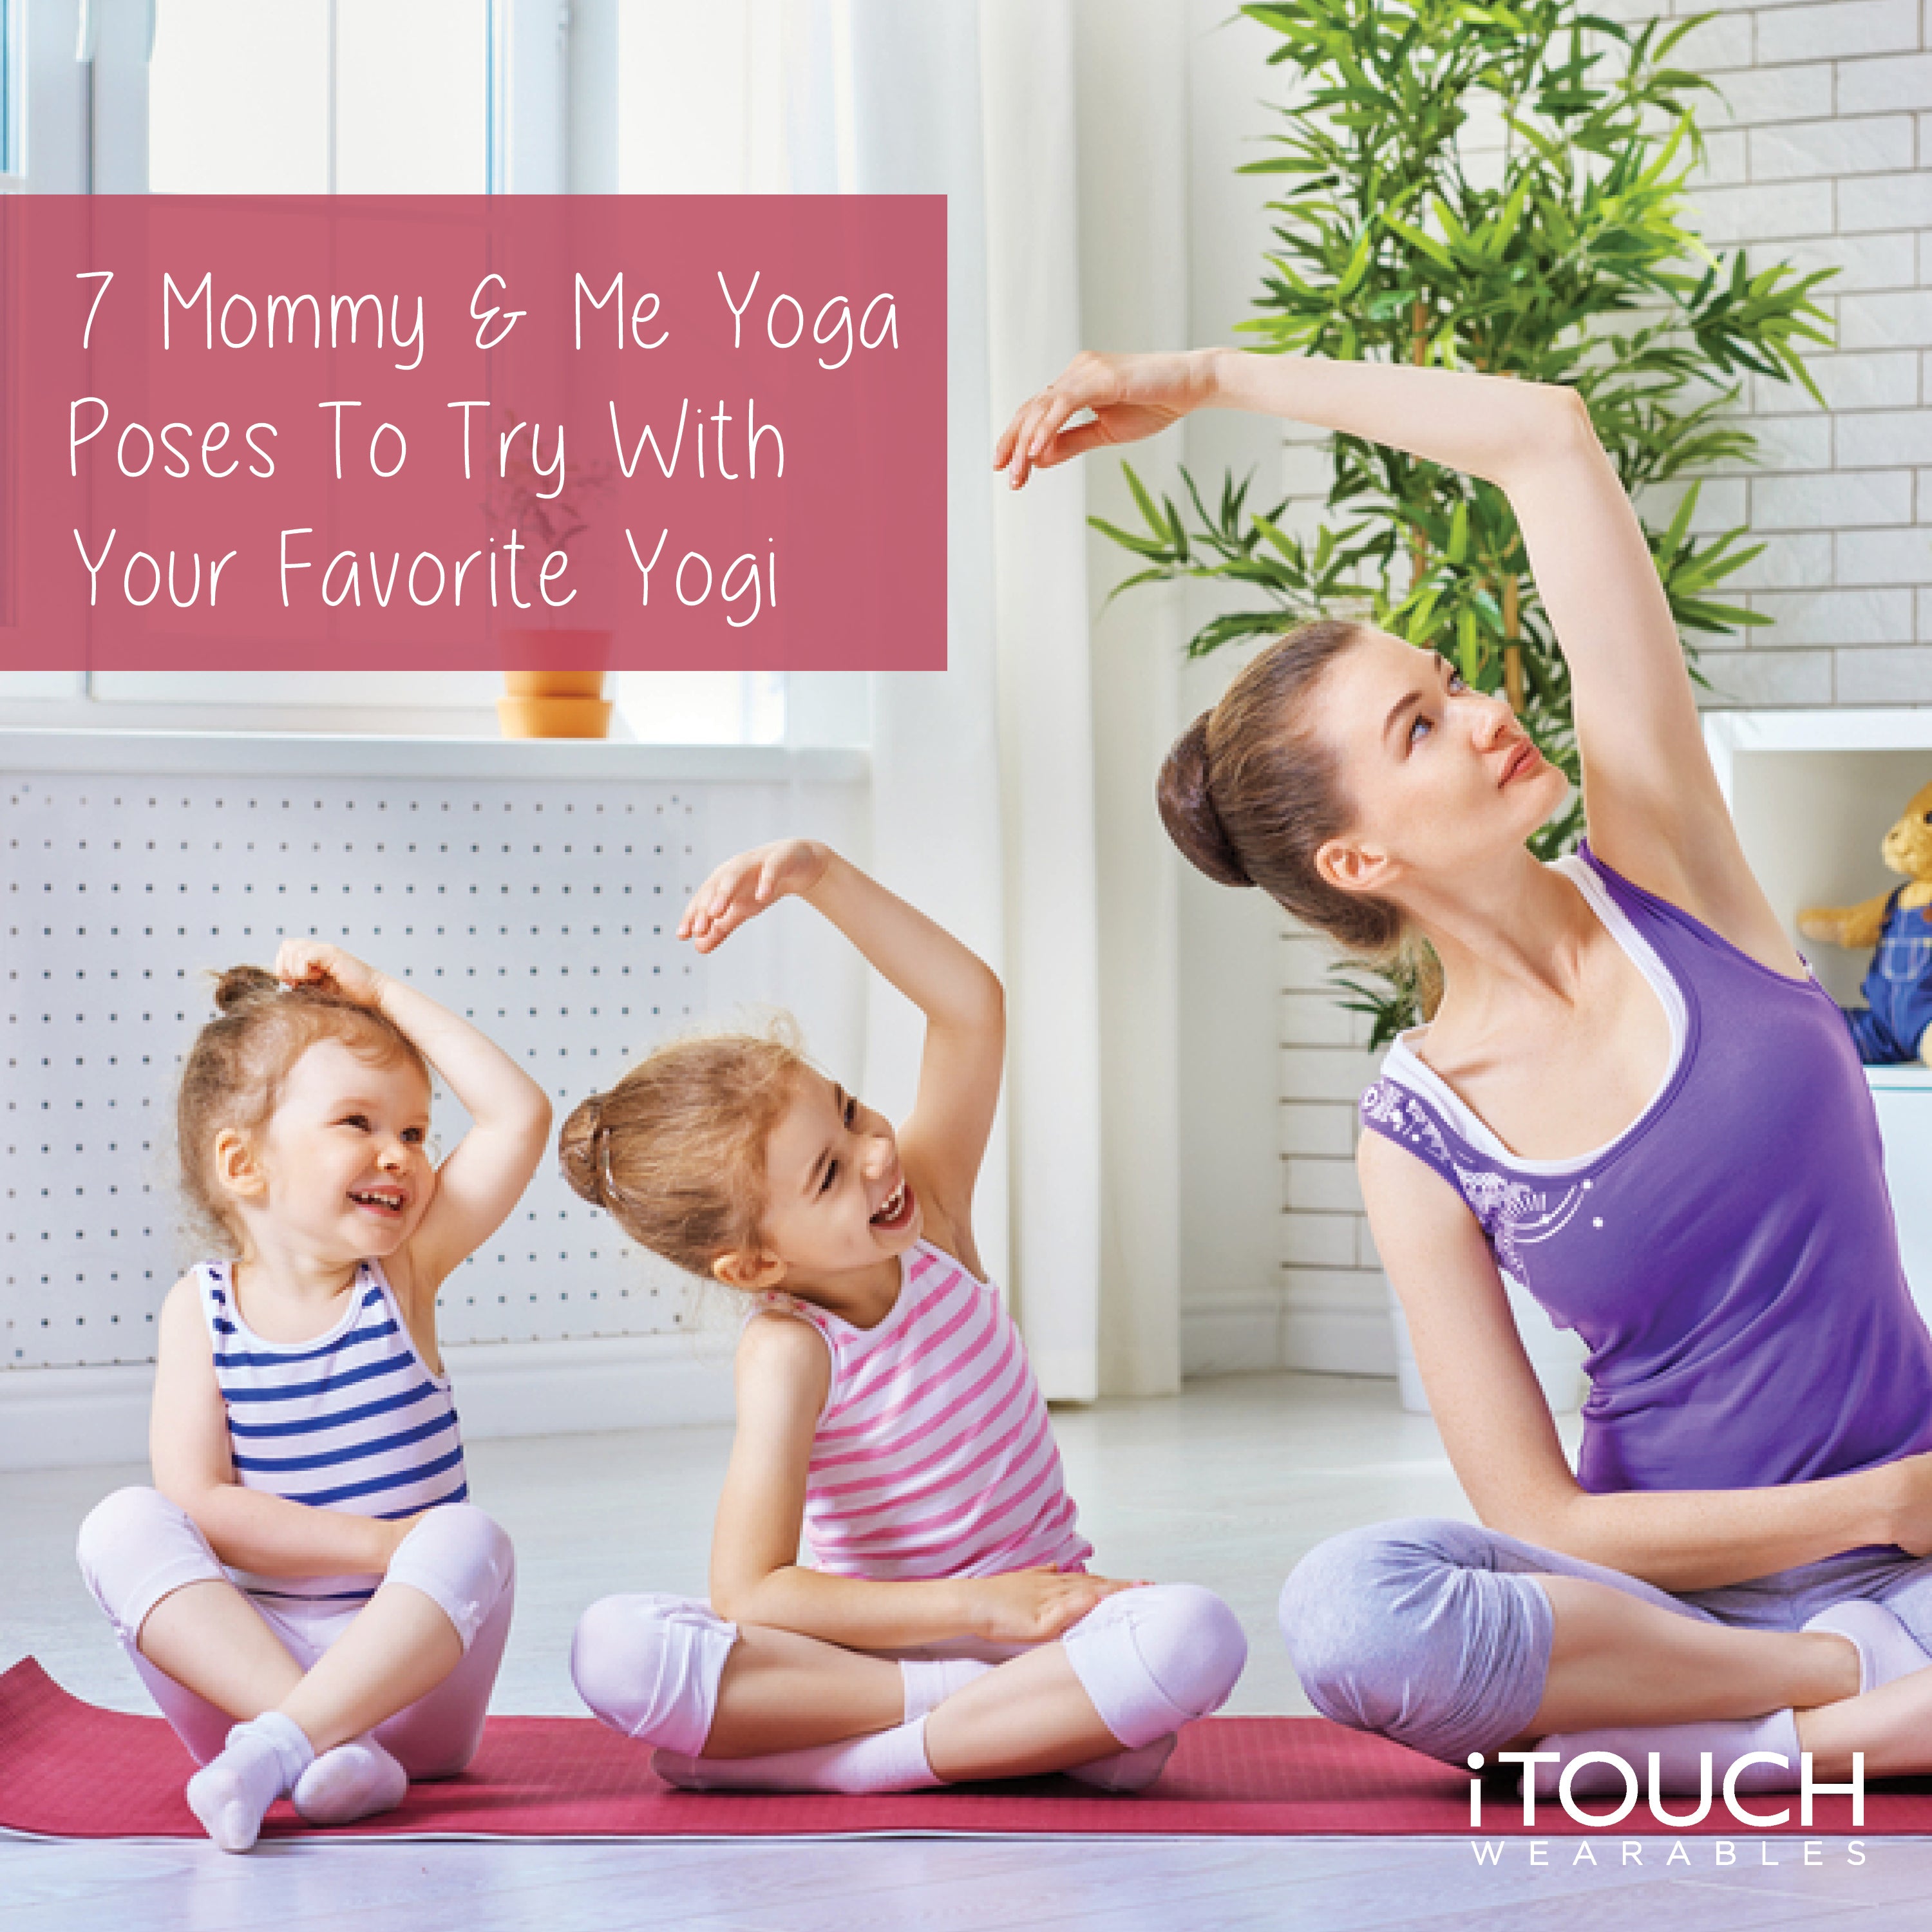 7 Mommy & Me Yoga Poses To Try With Your Favorite Yogi